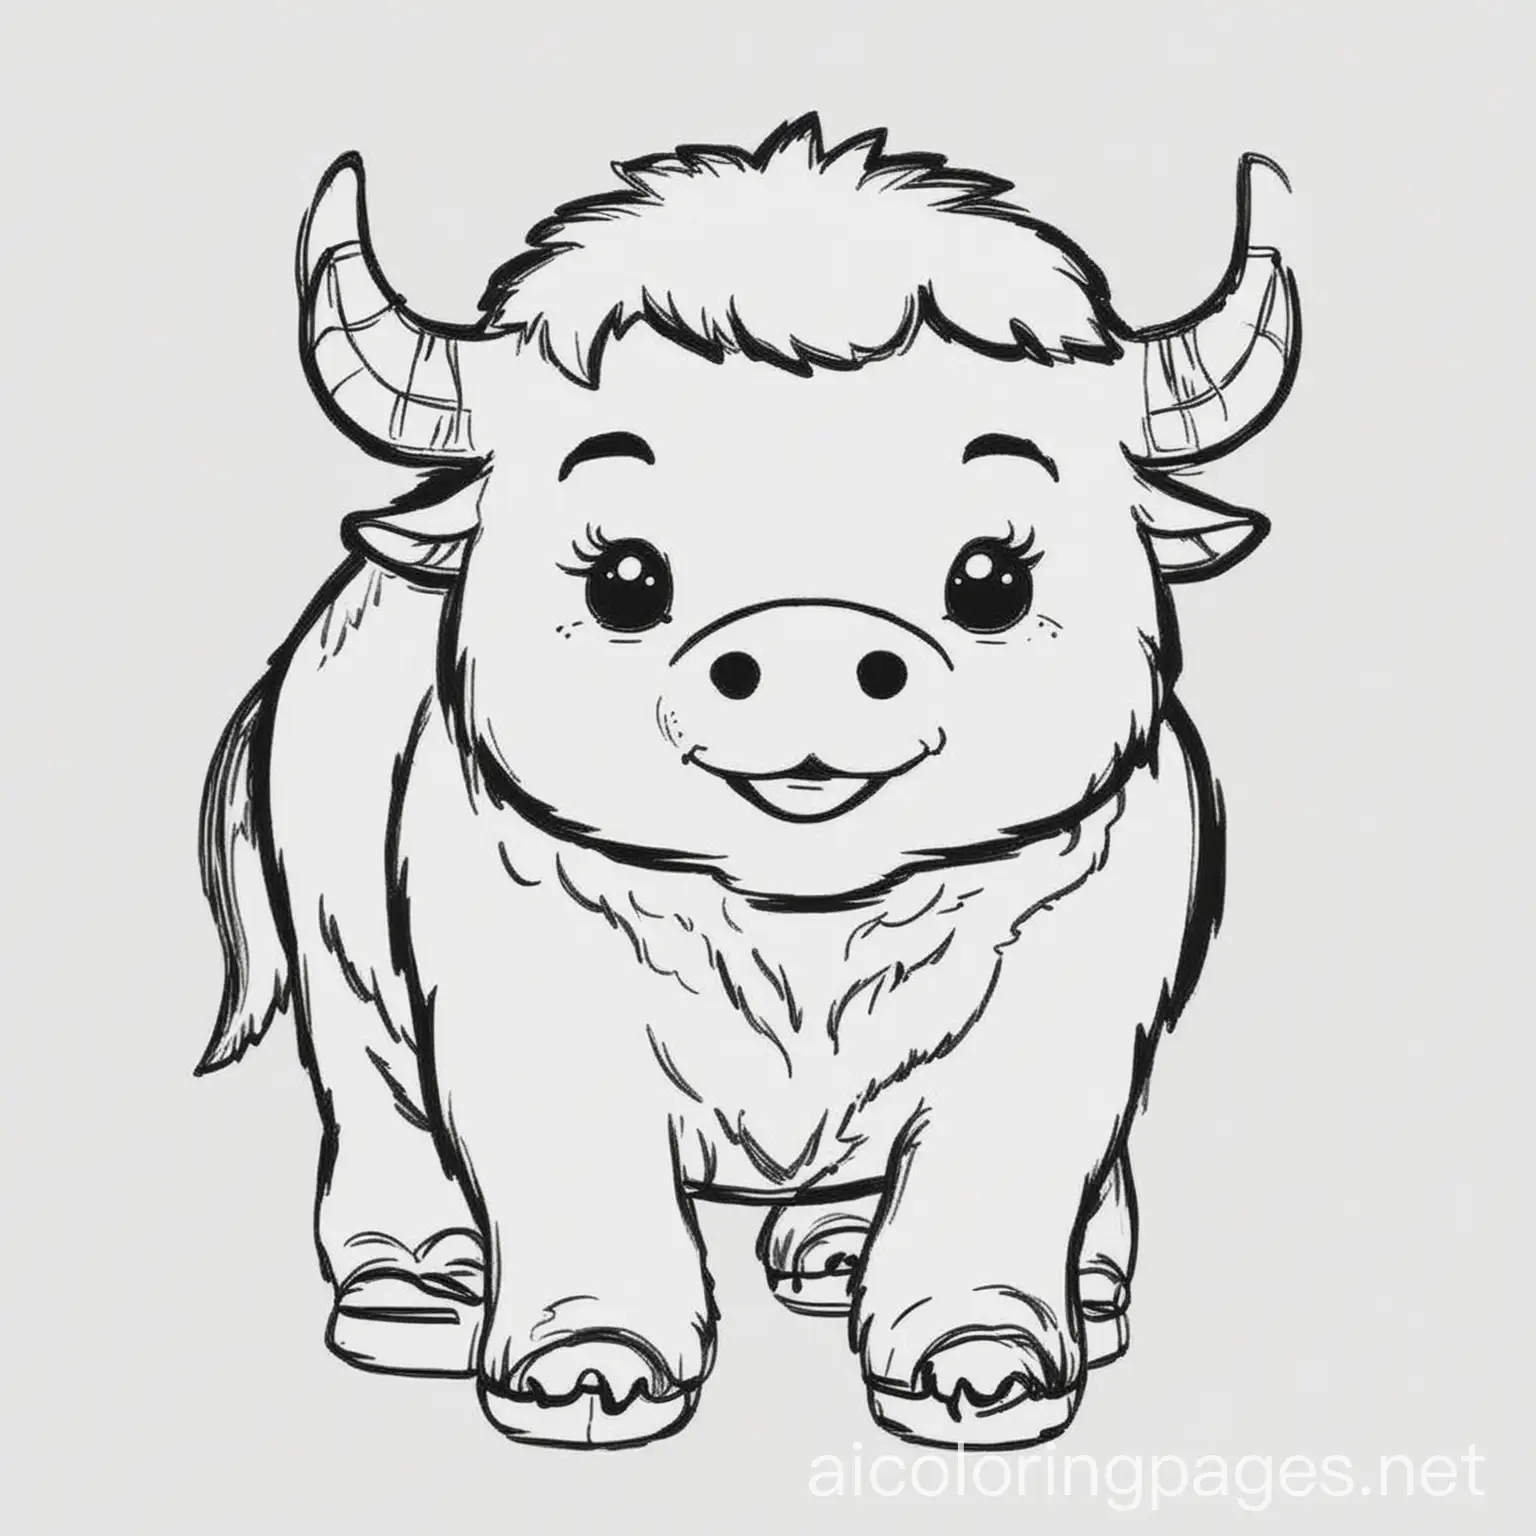 cute happy smiling Buffalo baby black and white for colouring for children, Coloring Page, black and white, line art, white background, Simplicity, Ample White Space. The background of the coloring page is plain white to make it easy for young children to color within the lines. The outlines of all the subjects are easy to distinguish, making it simple for kids to color without too much difficulty, Coloring Page, black and white, line art, white background, Simplicity, Ample White Space. The background of the coloring page is plain white to make it easy for young children to color within the lines. The outlines of all the subjects are easy to distinguish, making it simple for kids to color without too much difficulty, Coloring Page, black and white, line art, white background, Simplicity, Ample White Space. The background of the coloring page is plain white to make it easy for young children to color within the lines. The outlines of all the subjects are easy to distinguish, making it simple for kids to color without too much difficulty